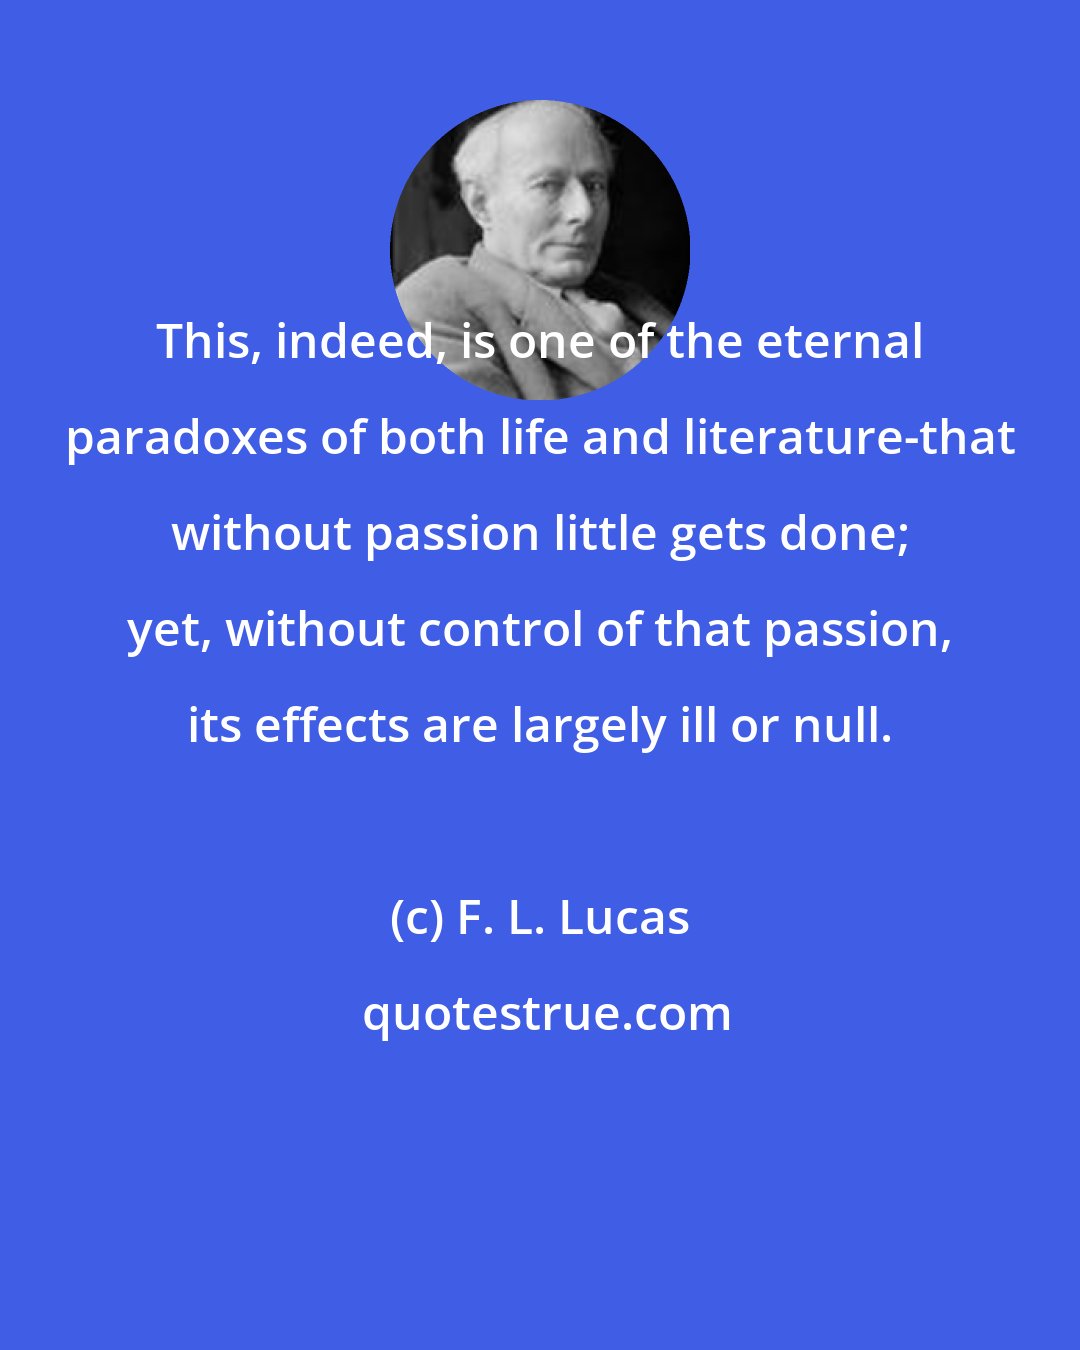 F. L. Lucas: This, indeed, is one of the eternal paradoxes of both life and literature-that without passion little gets done; yet, without control of that passion, its effects are largely ill or null.